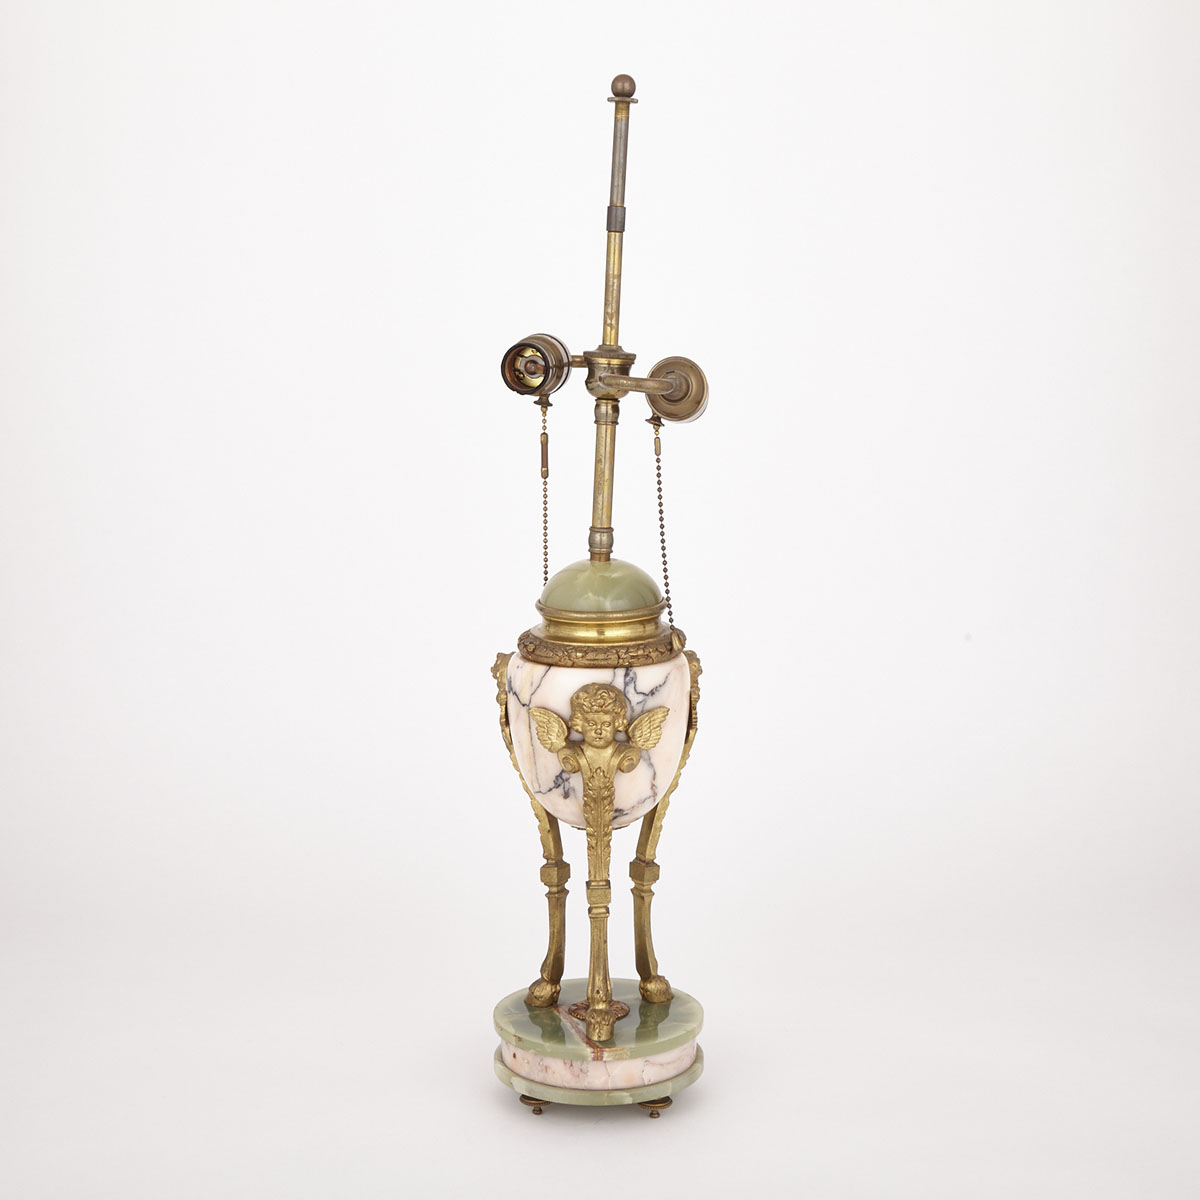 Louis XVI Style Ormolu Mounted Onyx and Pink Marble Cassolette Form Table Lamp, mid 20th century